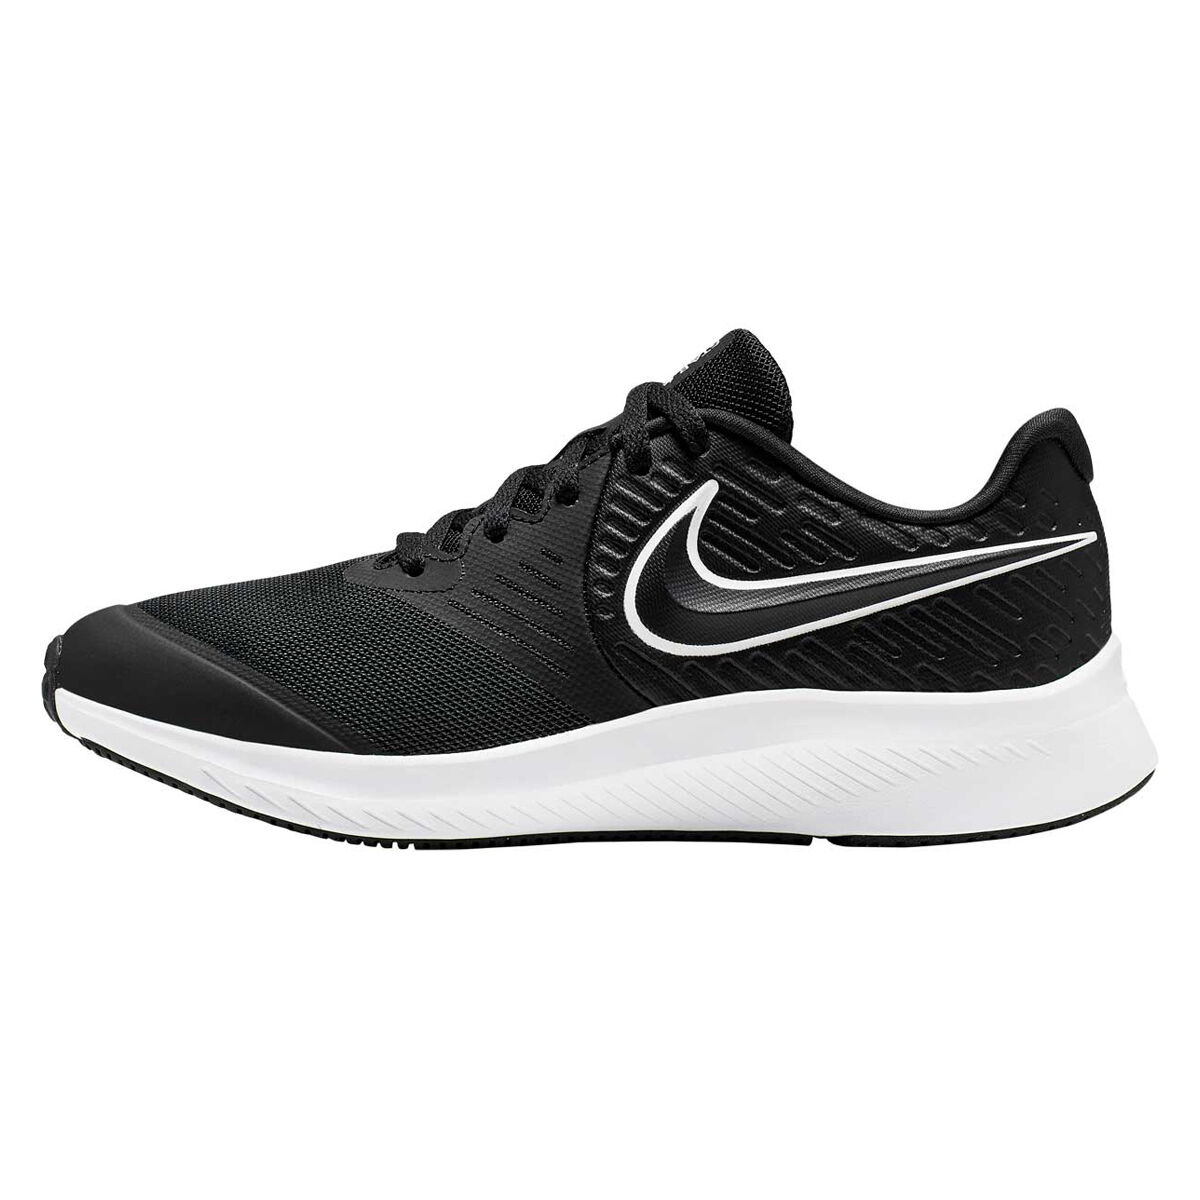 nike shoes townsville